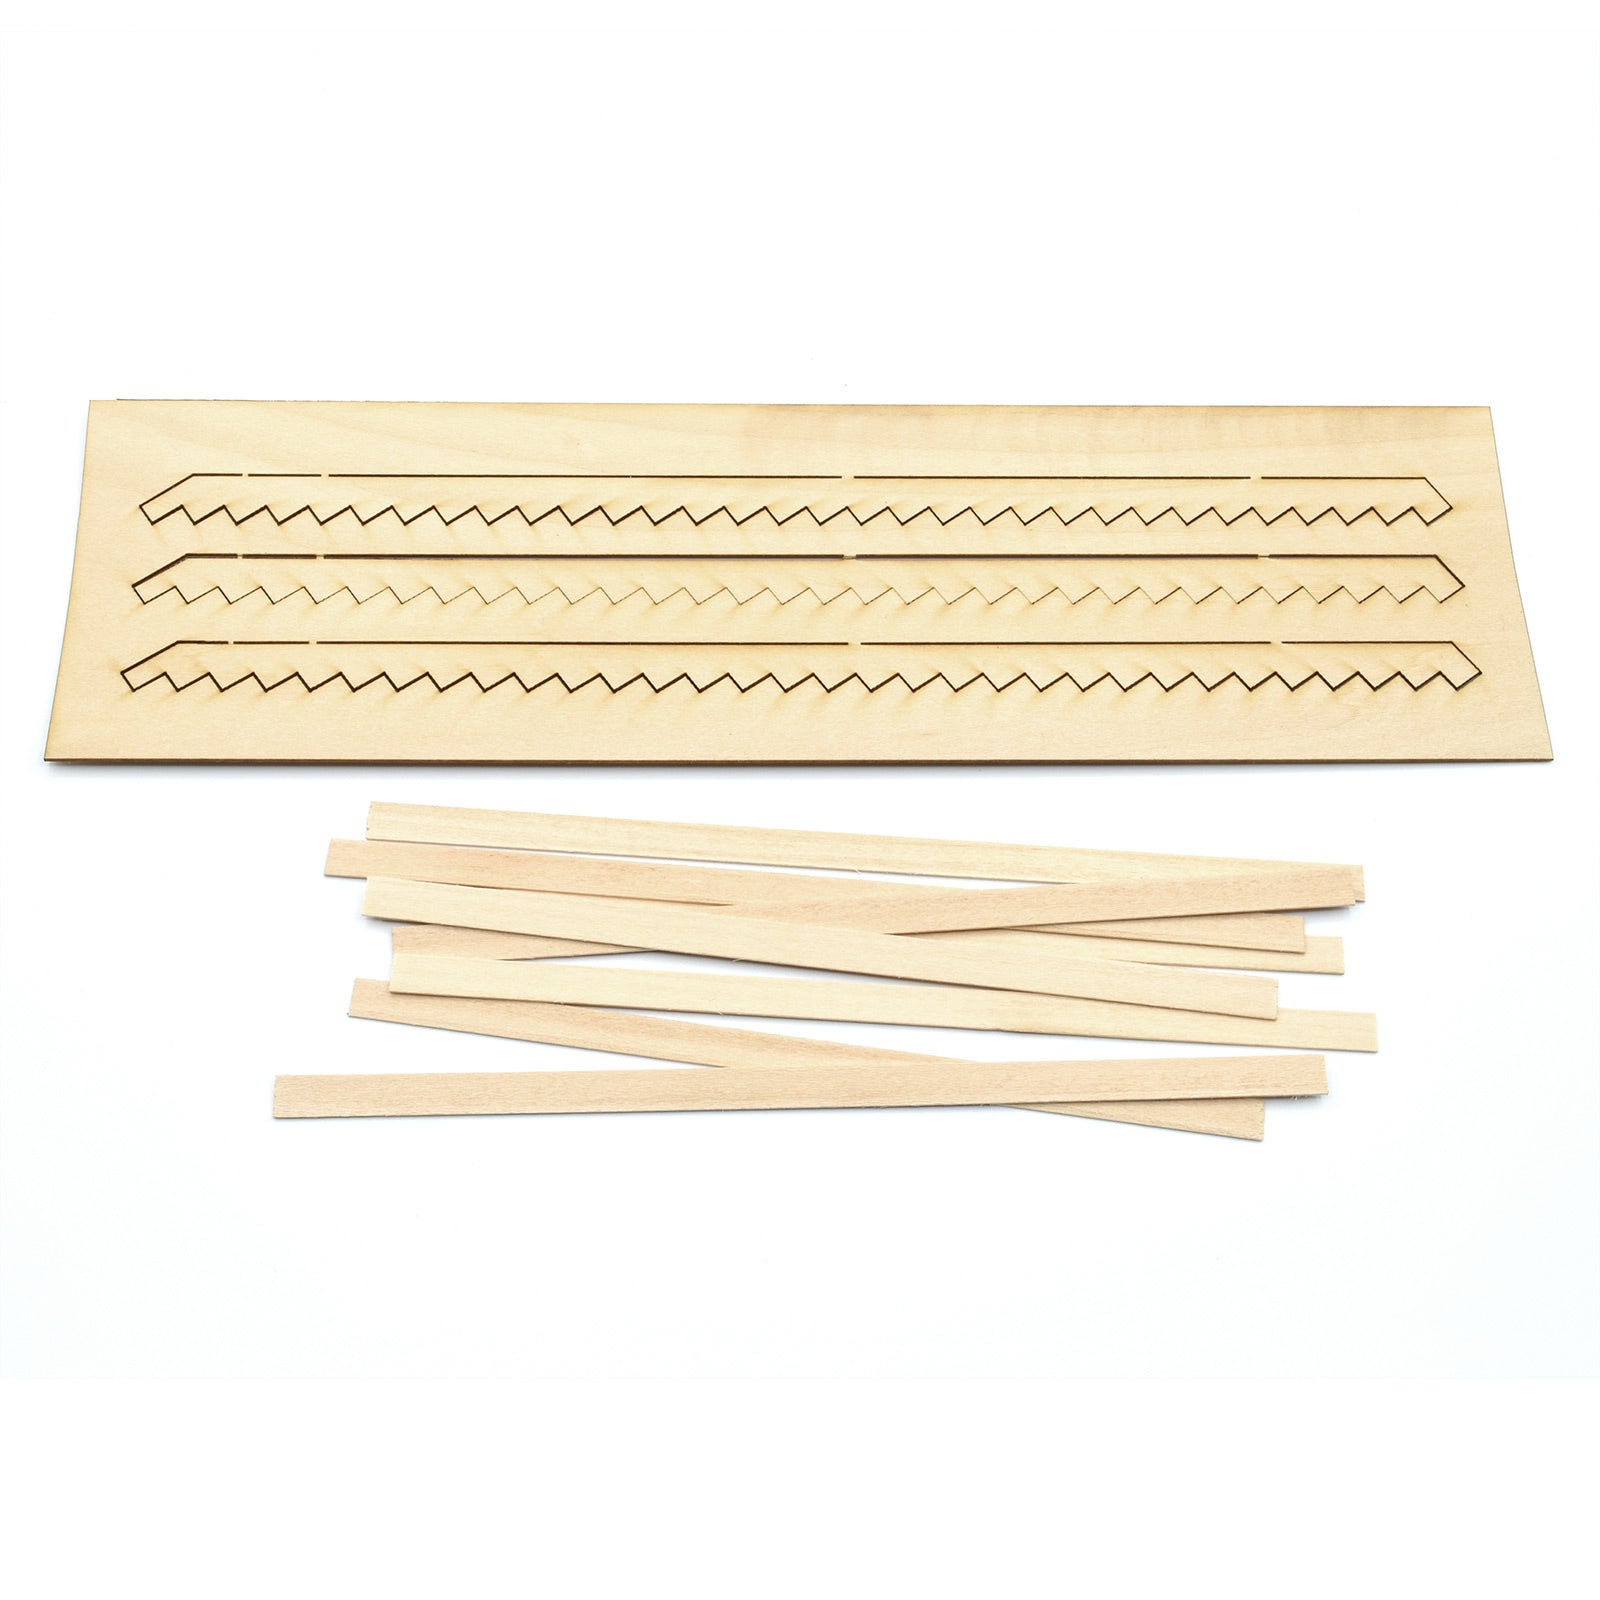 Stair Stringer Kit, O Scale, By Scientific